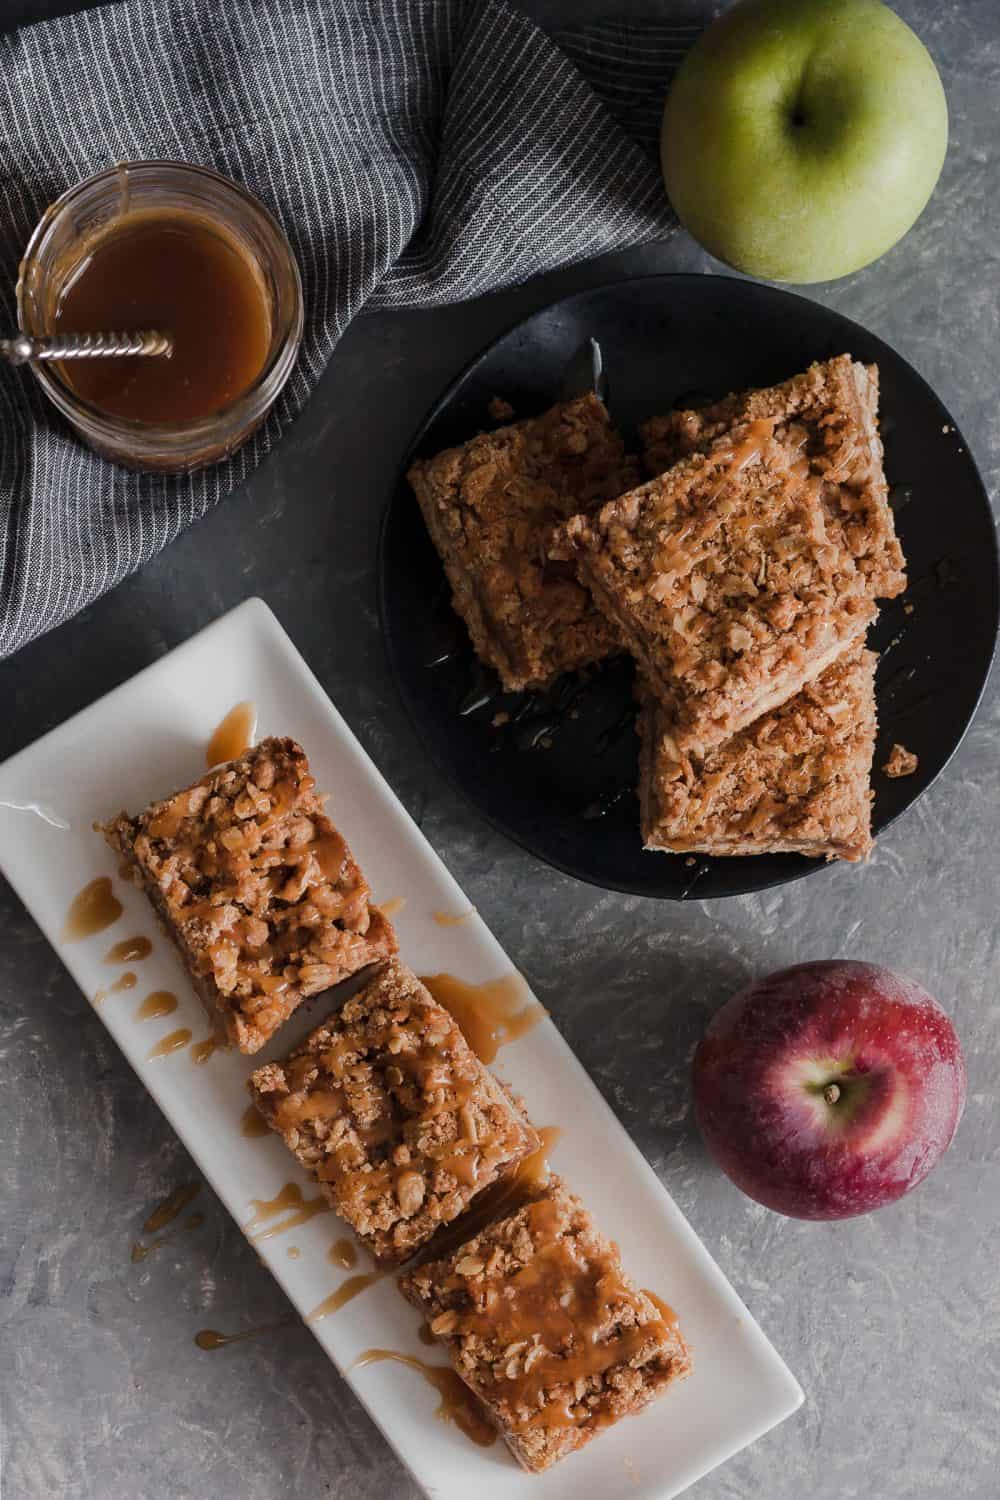 These popular caramel apple bars are a go-to recipe for a crowd. Drips of caramel, loads of apple flavor, and browned butter make these bars a favorite dessert!  * Caramel Apple Bar Recipe on GoodieGodmother.com